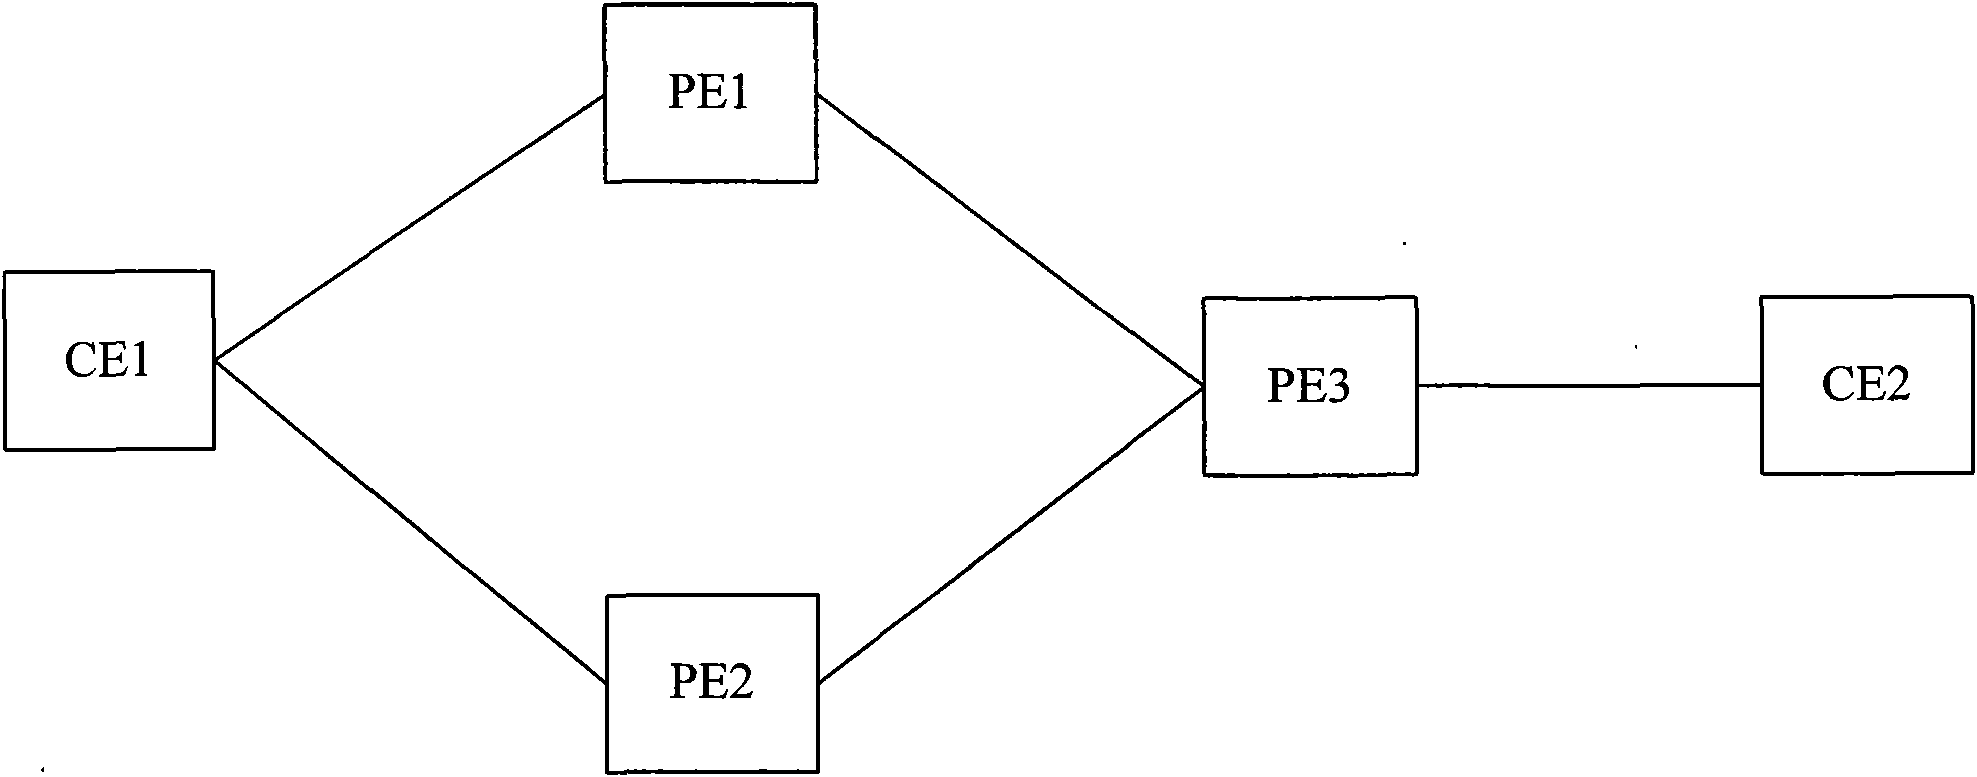 Double-returning protection switching method based on VPLS and system